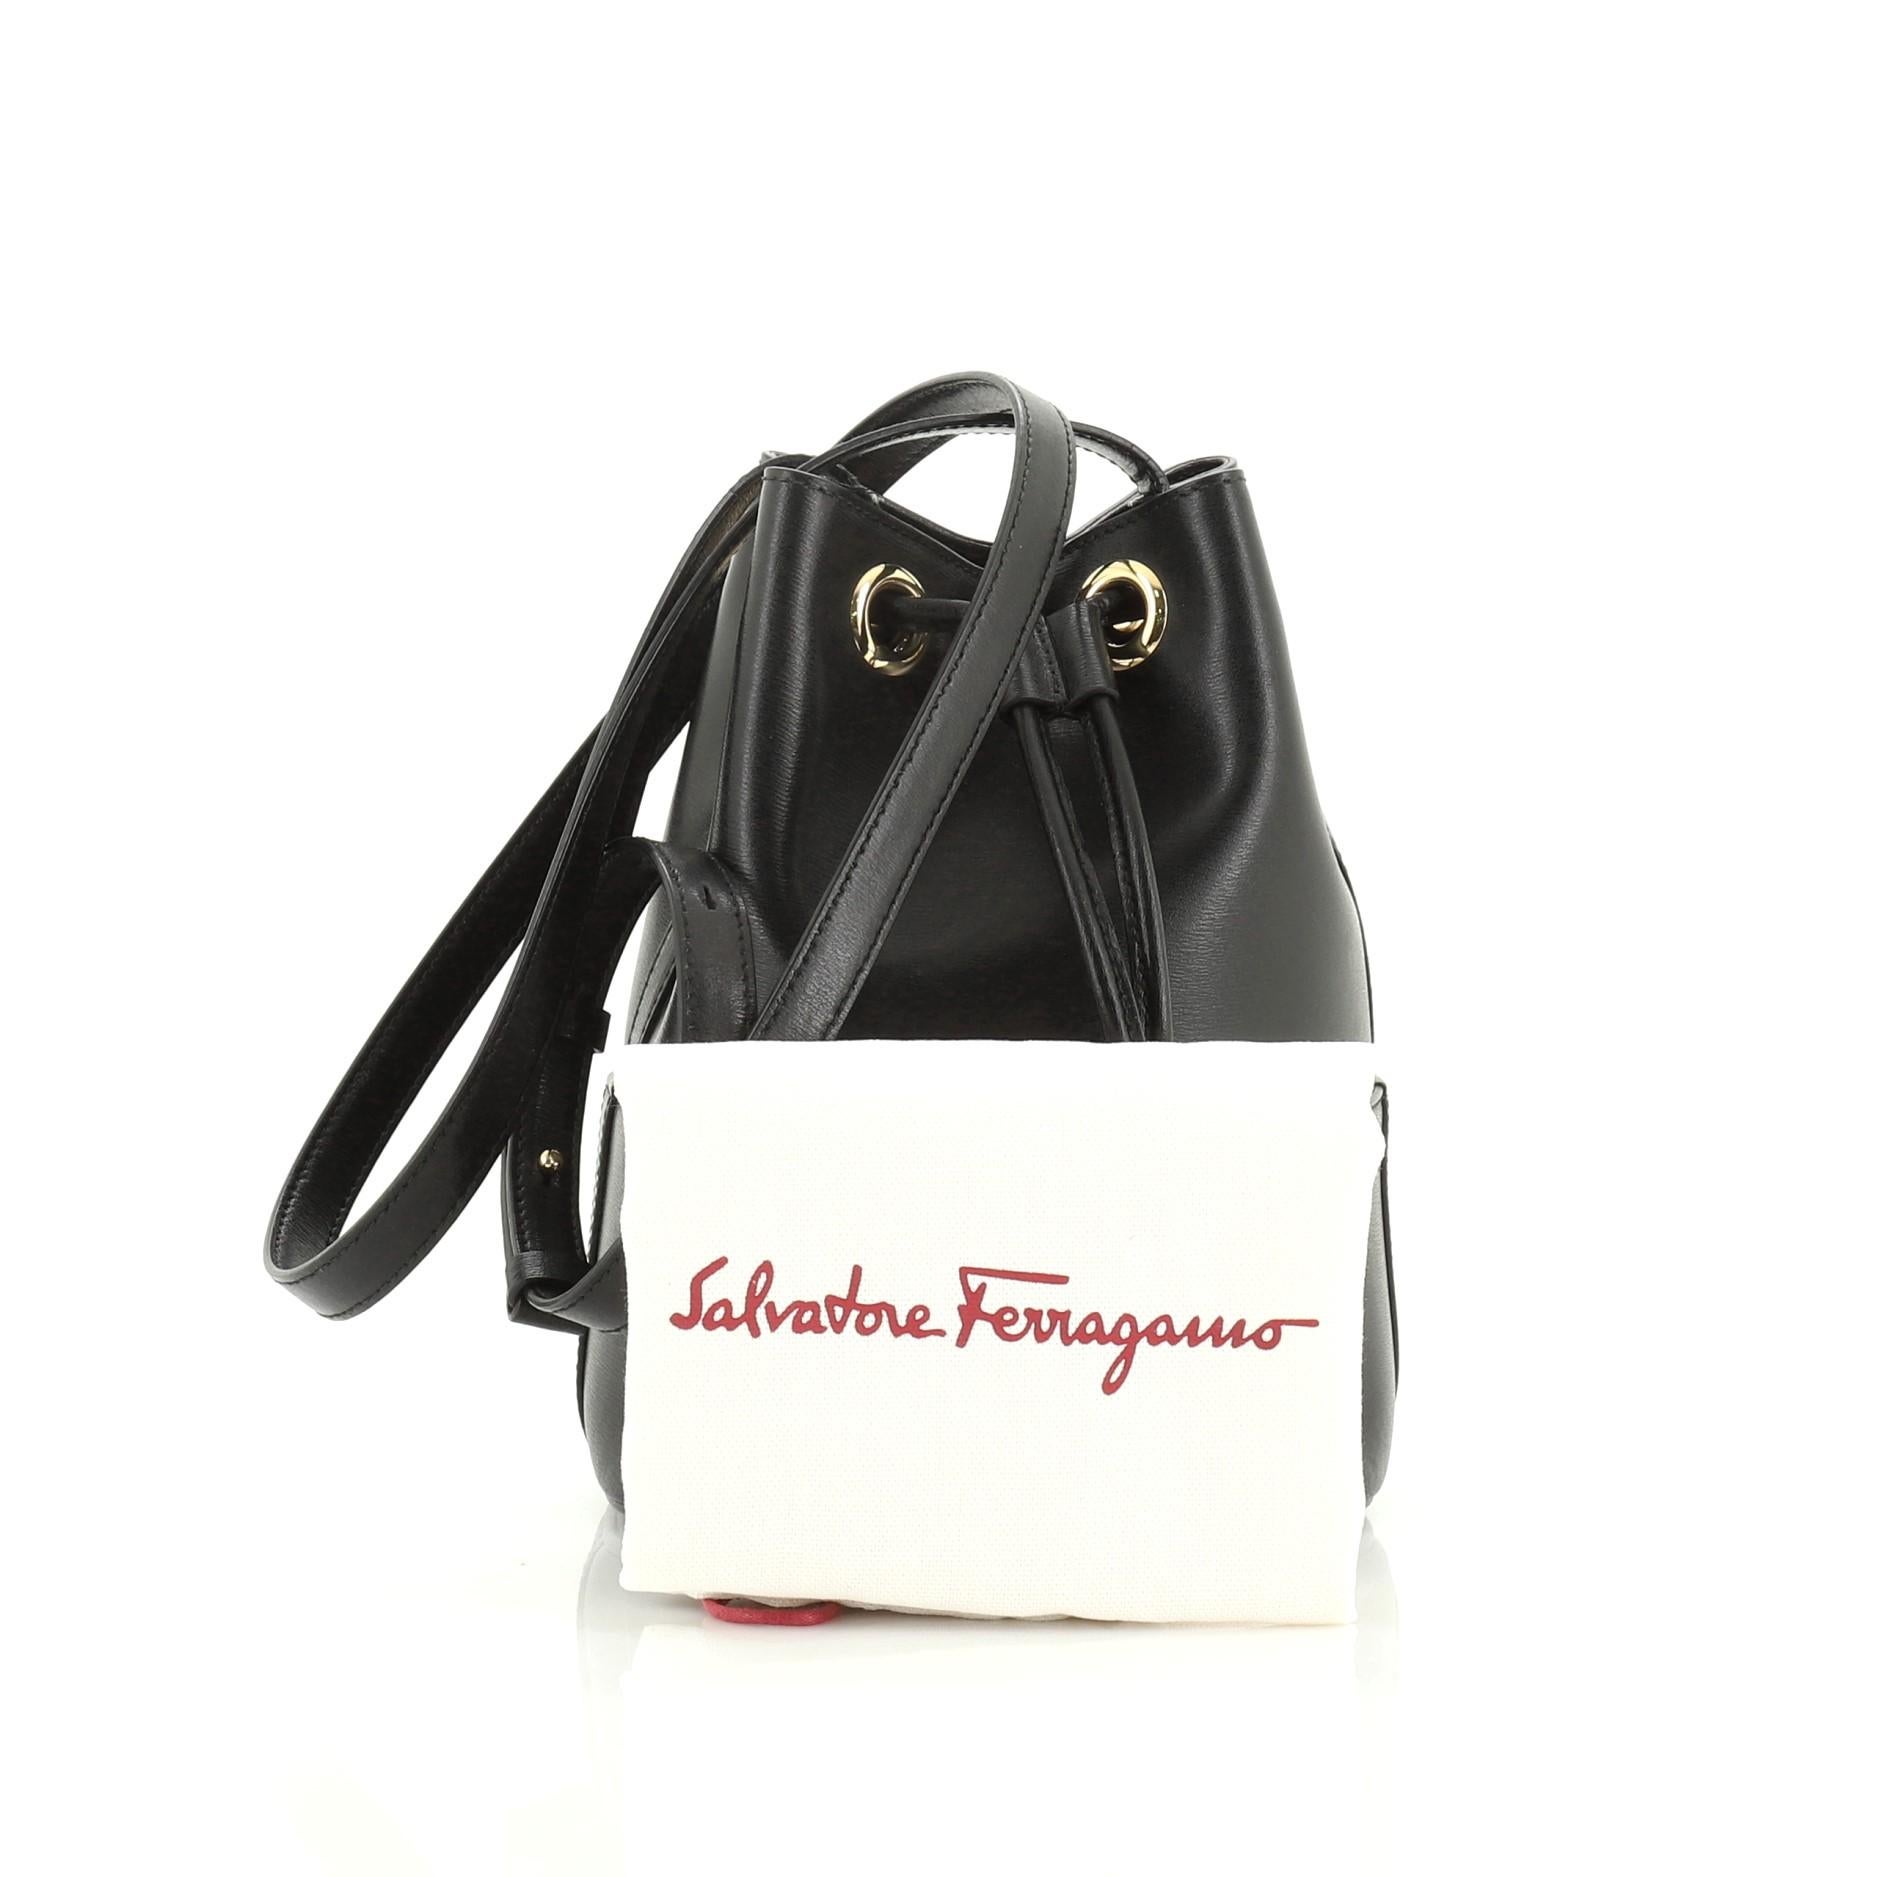 This Salvatore Ferragamo City Bucket Bag Leather Small, crafted from black leather, features an adjustable leather strap, protective base studs and gold-tone hardware. Its drawstring closure opens to a black microfiber interior.

Estimated Retail